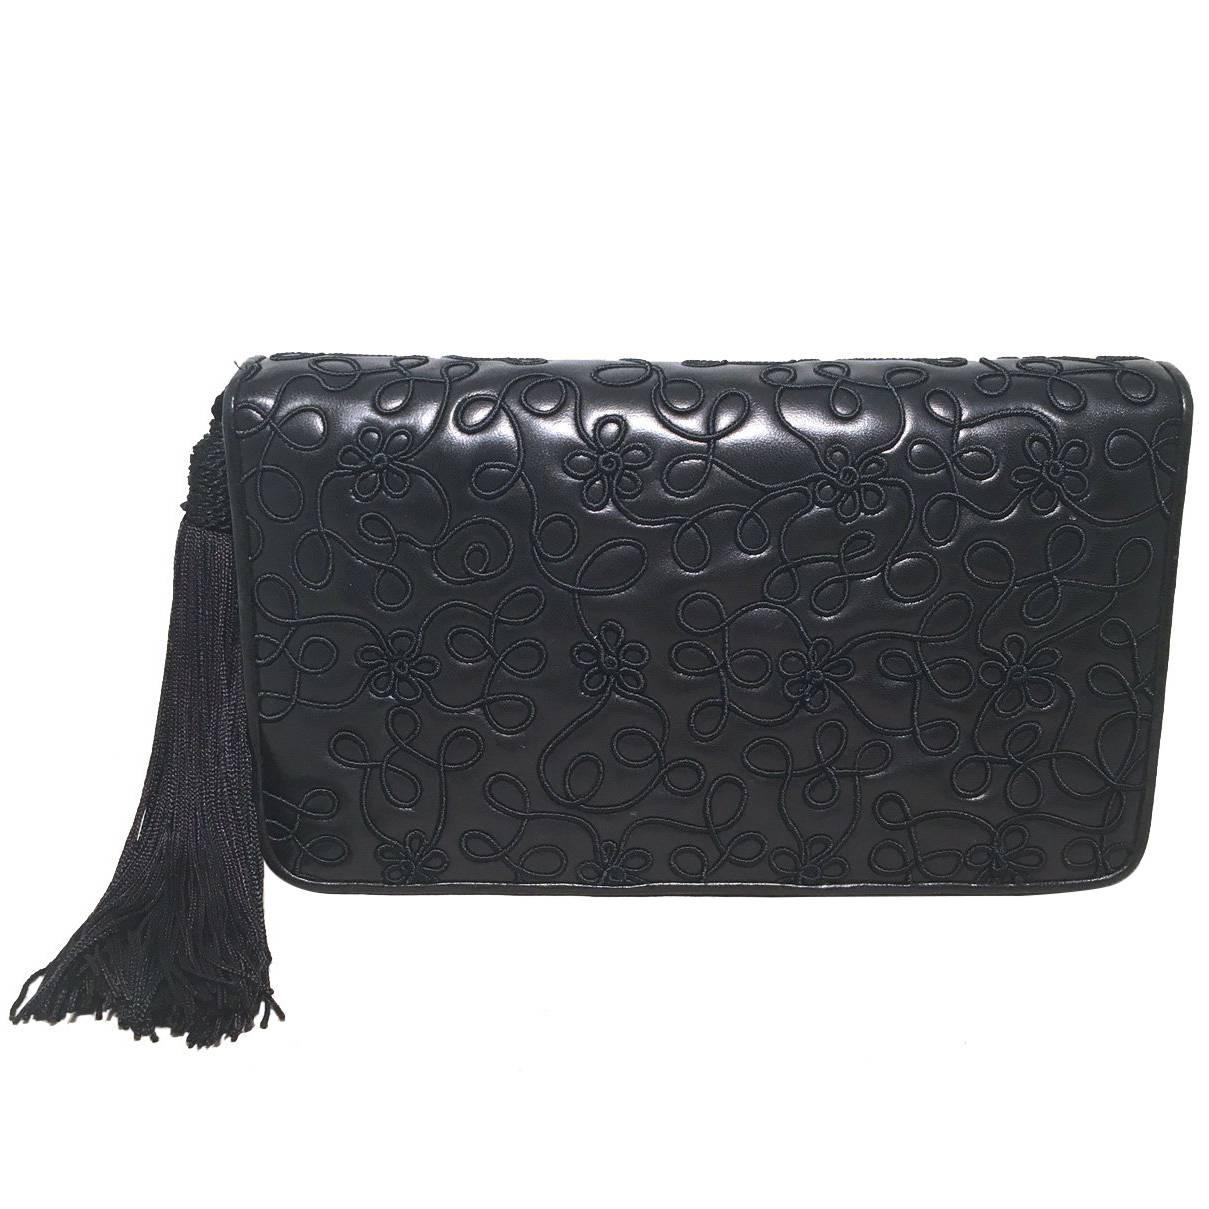 Judith Leiber Navy Blue Embroidered Leather Tassel Clutch